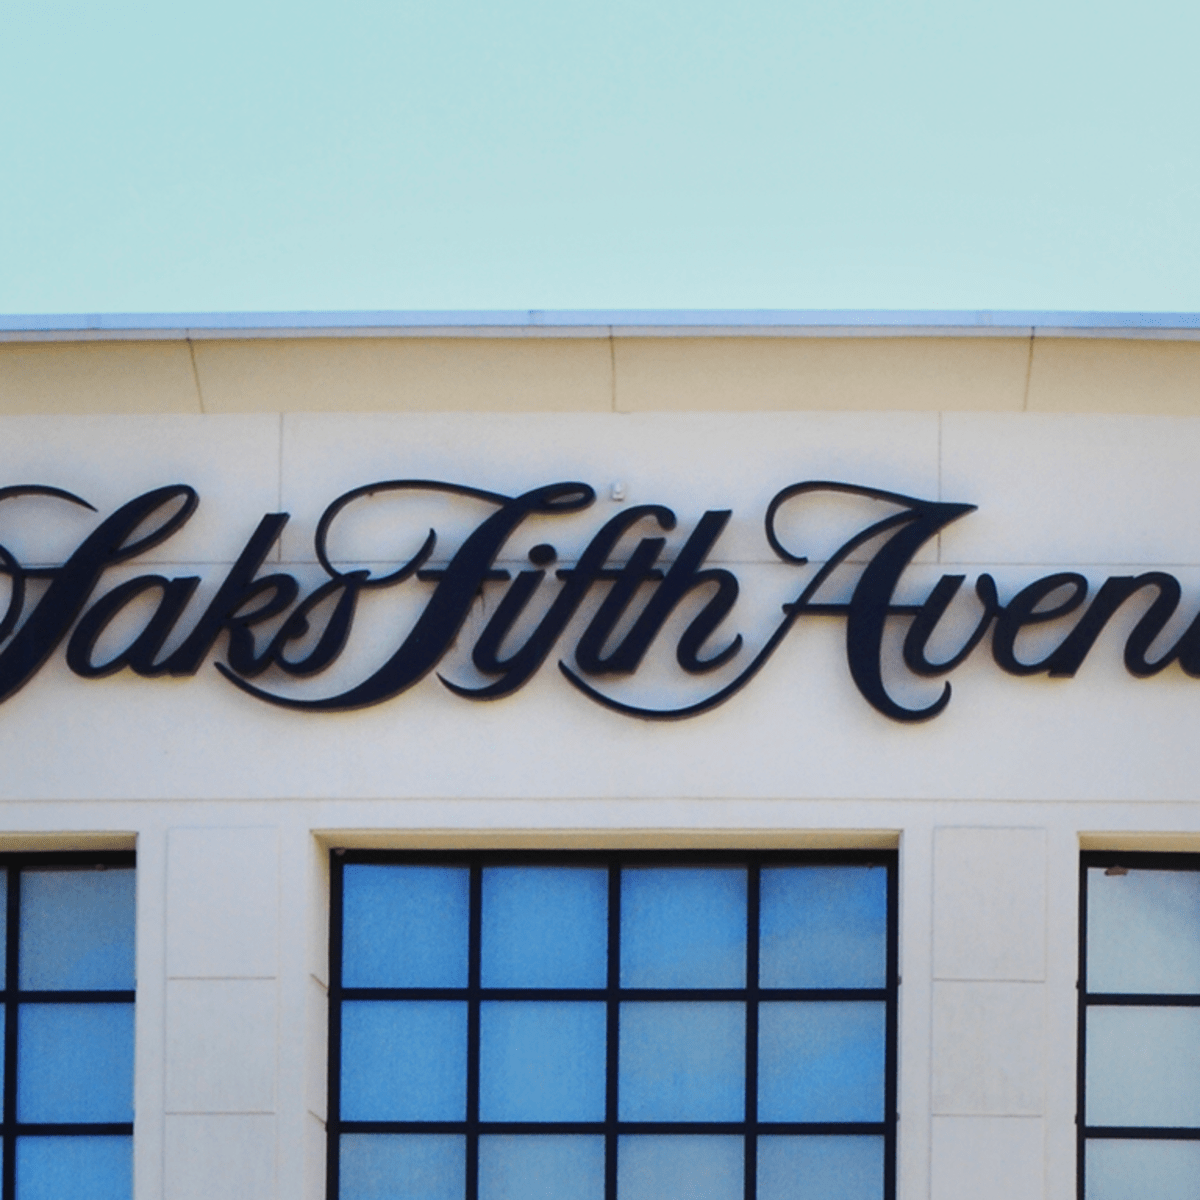 Saks Fifth Avenue Makes Bid to Open Casino in NYC Flagship Store